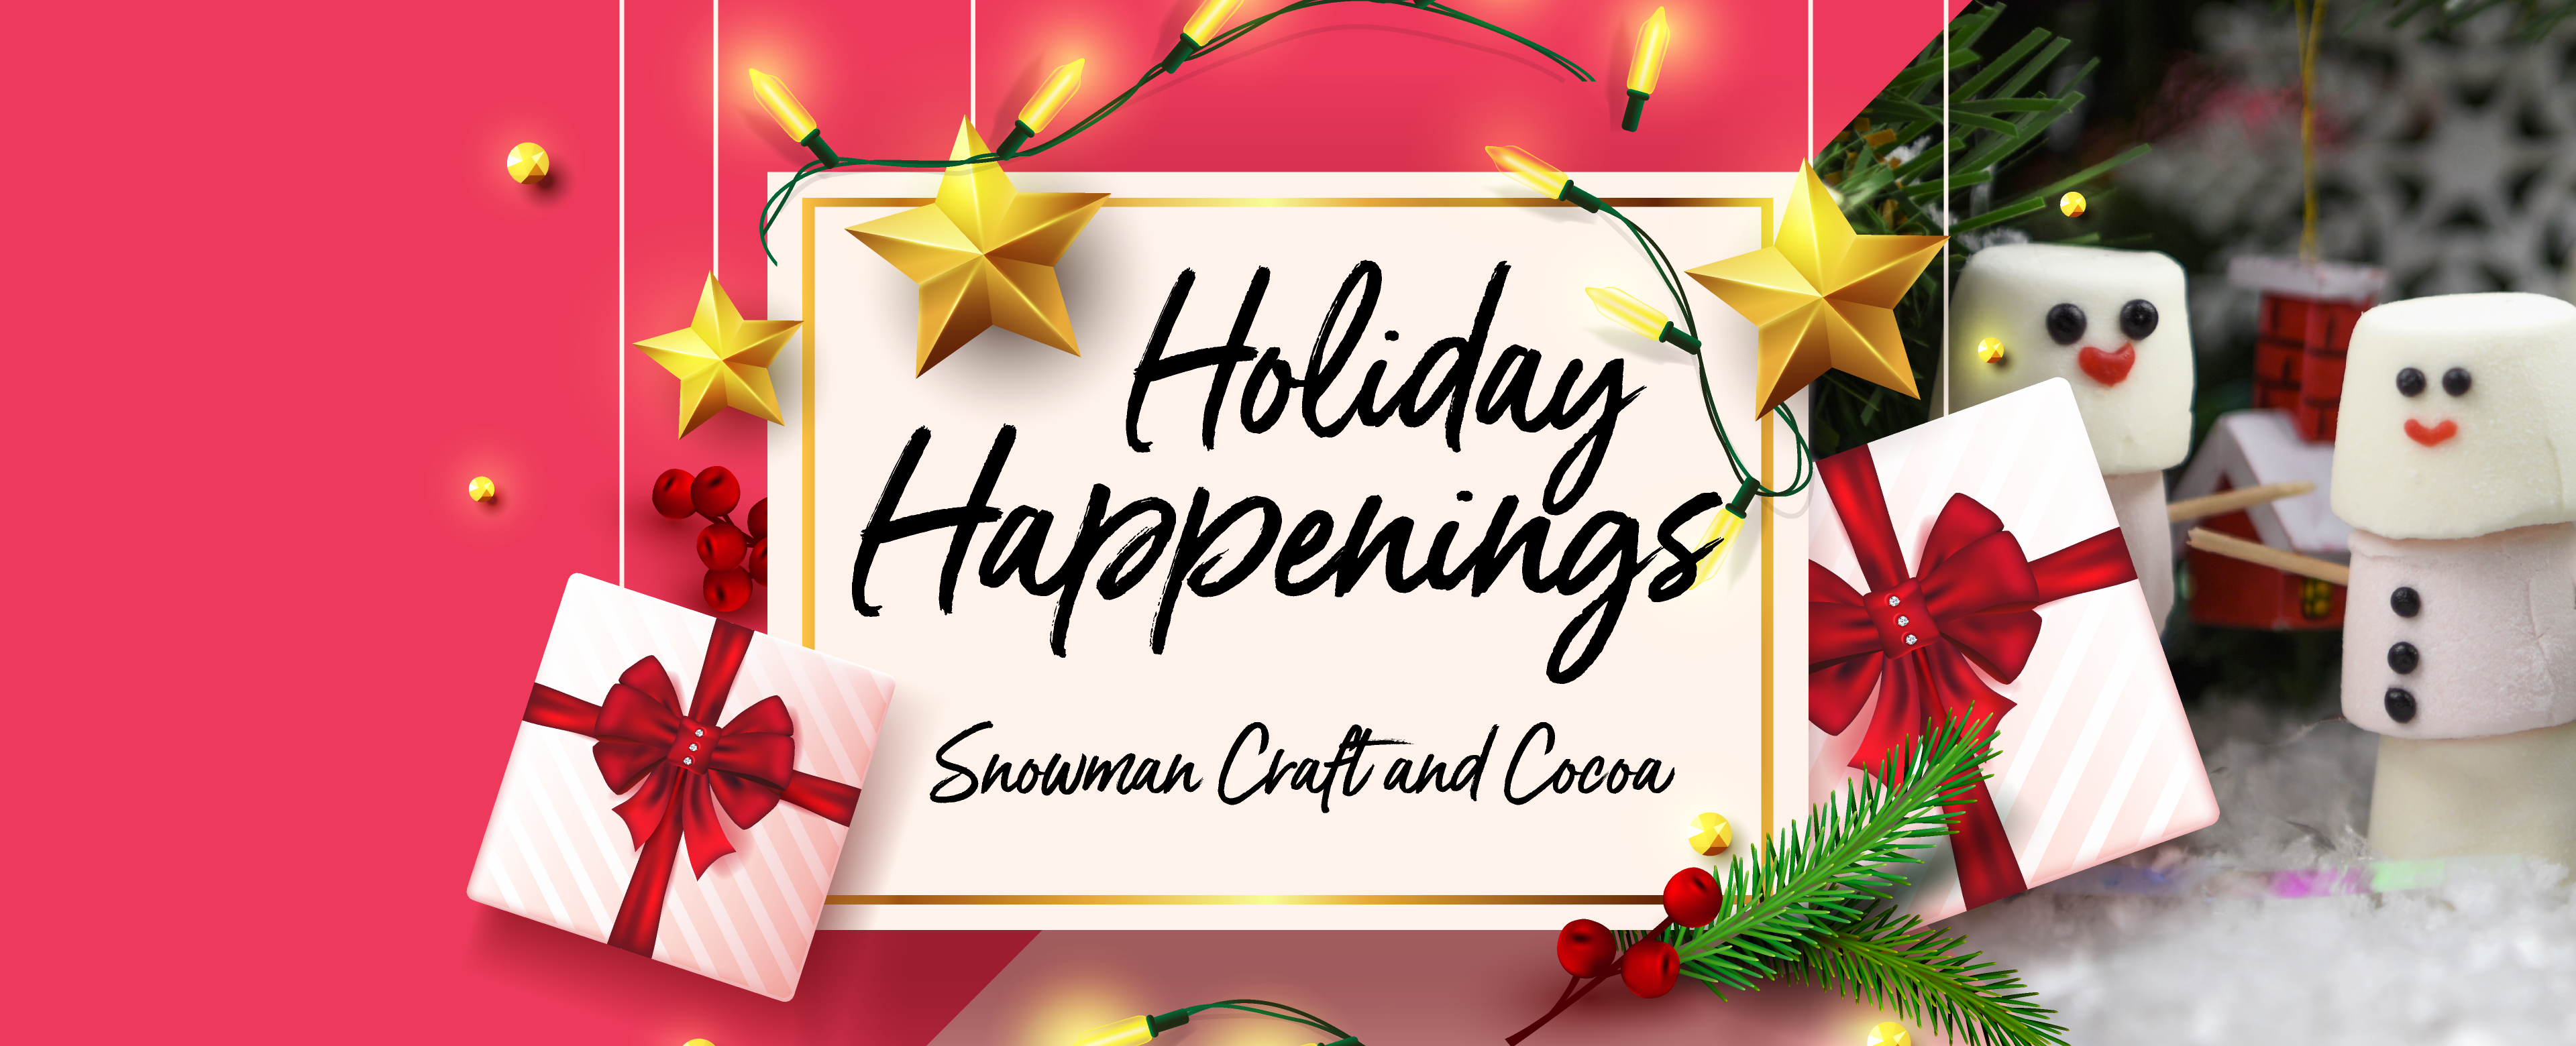 Holiday Happenings: Snowman Craft and Cocoa